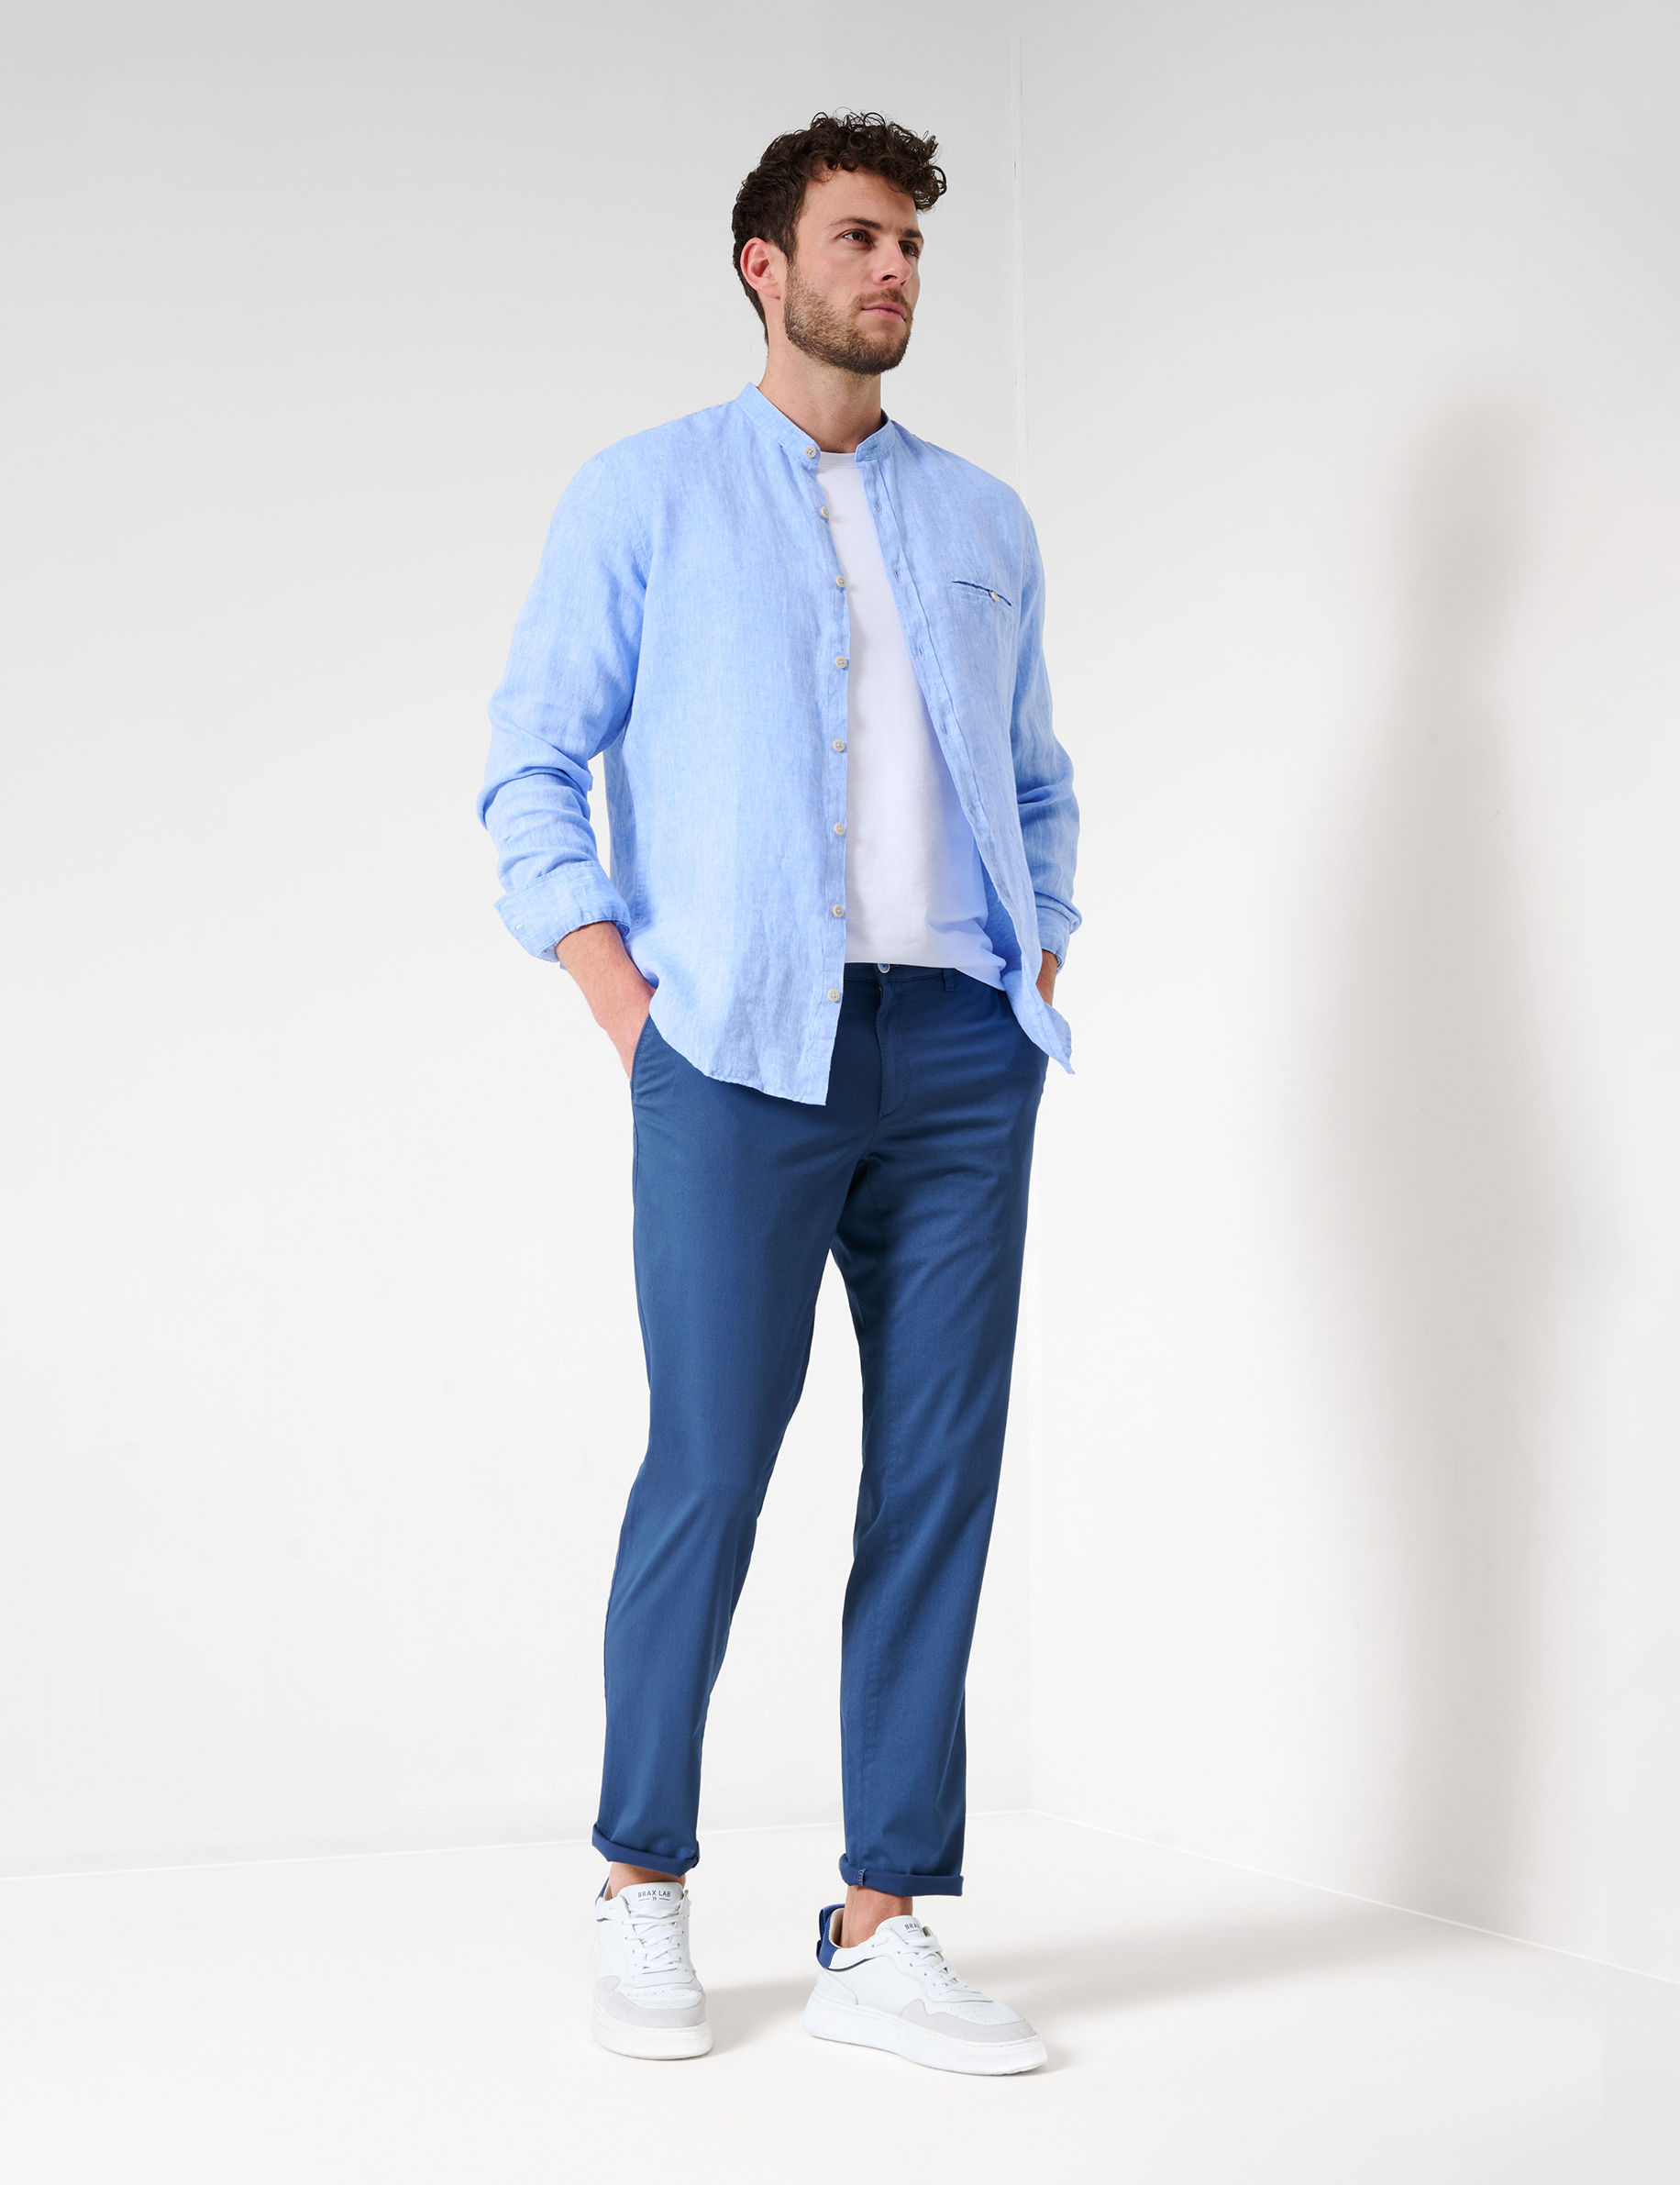 Men Style FABIO COVE Modern Fit Model Outfit